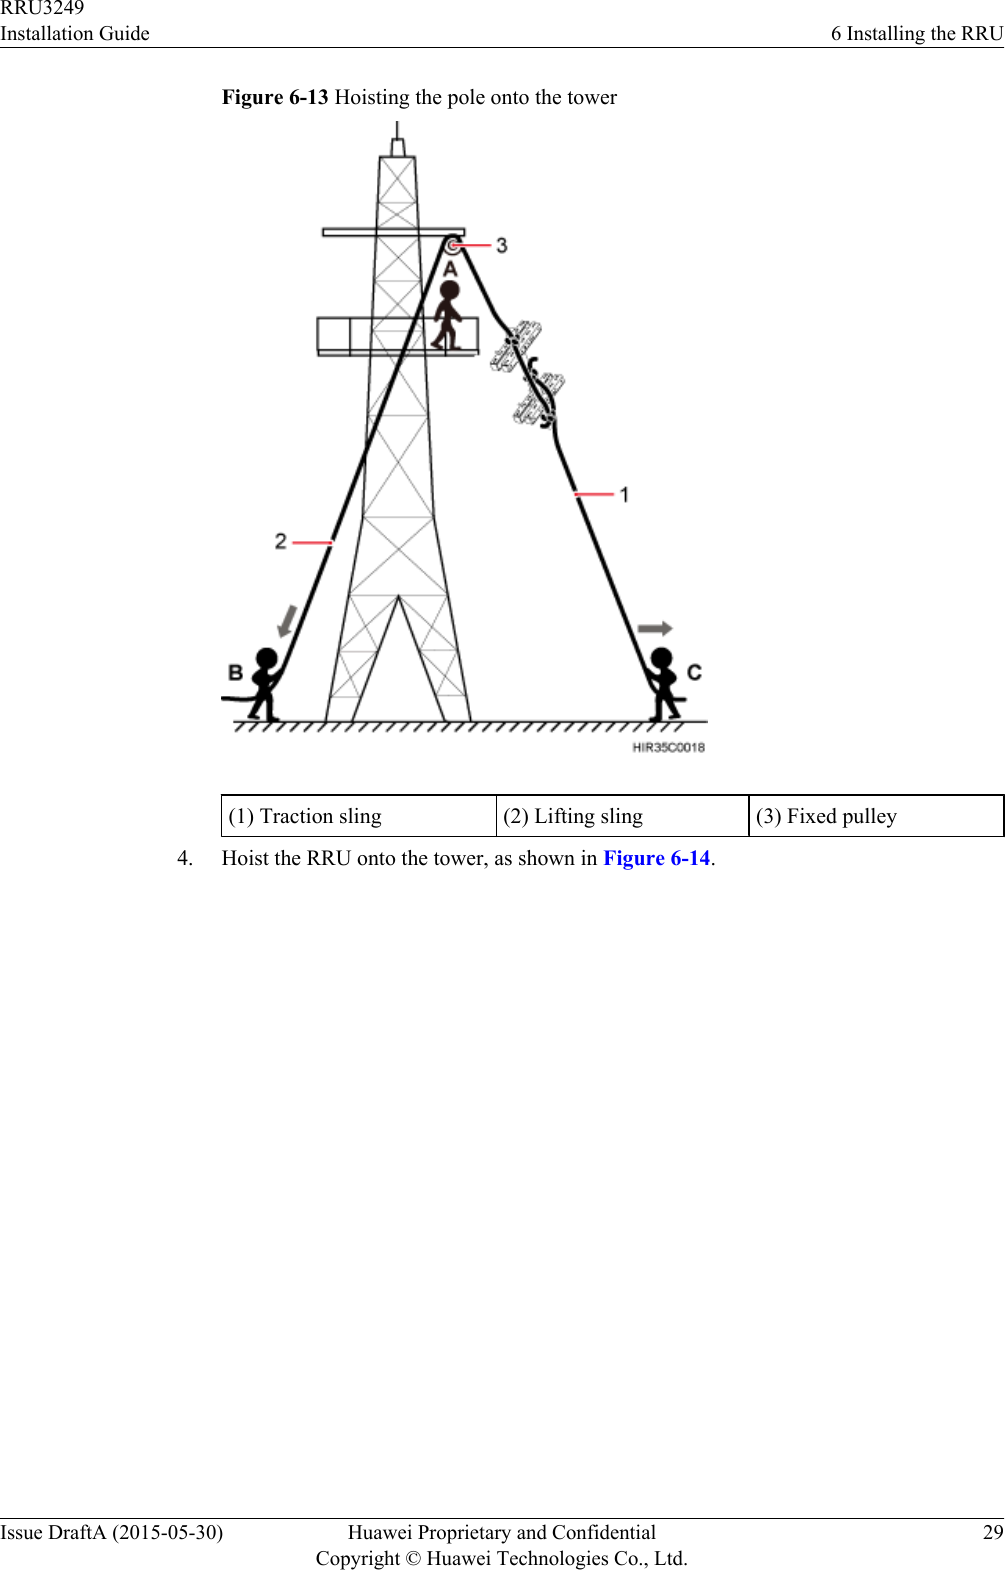 Figure 6-13 Hoisting the pole onto the tower(1) Traction sling (2) Lifting sling (3) Fixed pulley4. Hoist the RRU onto the tower, as shown in Figure 6-14.RRU3249Installation Guide 6 Installing the RRUIssue DraftA (2015-05-30) Huawei Proprietary and ConfidentialCopyright © Huawei Technologies Co., Ltd.29